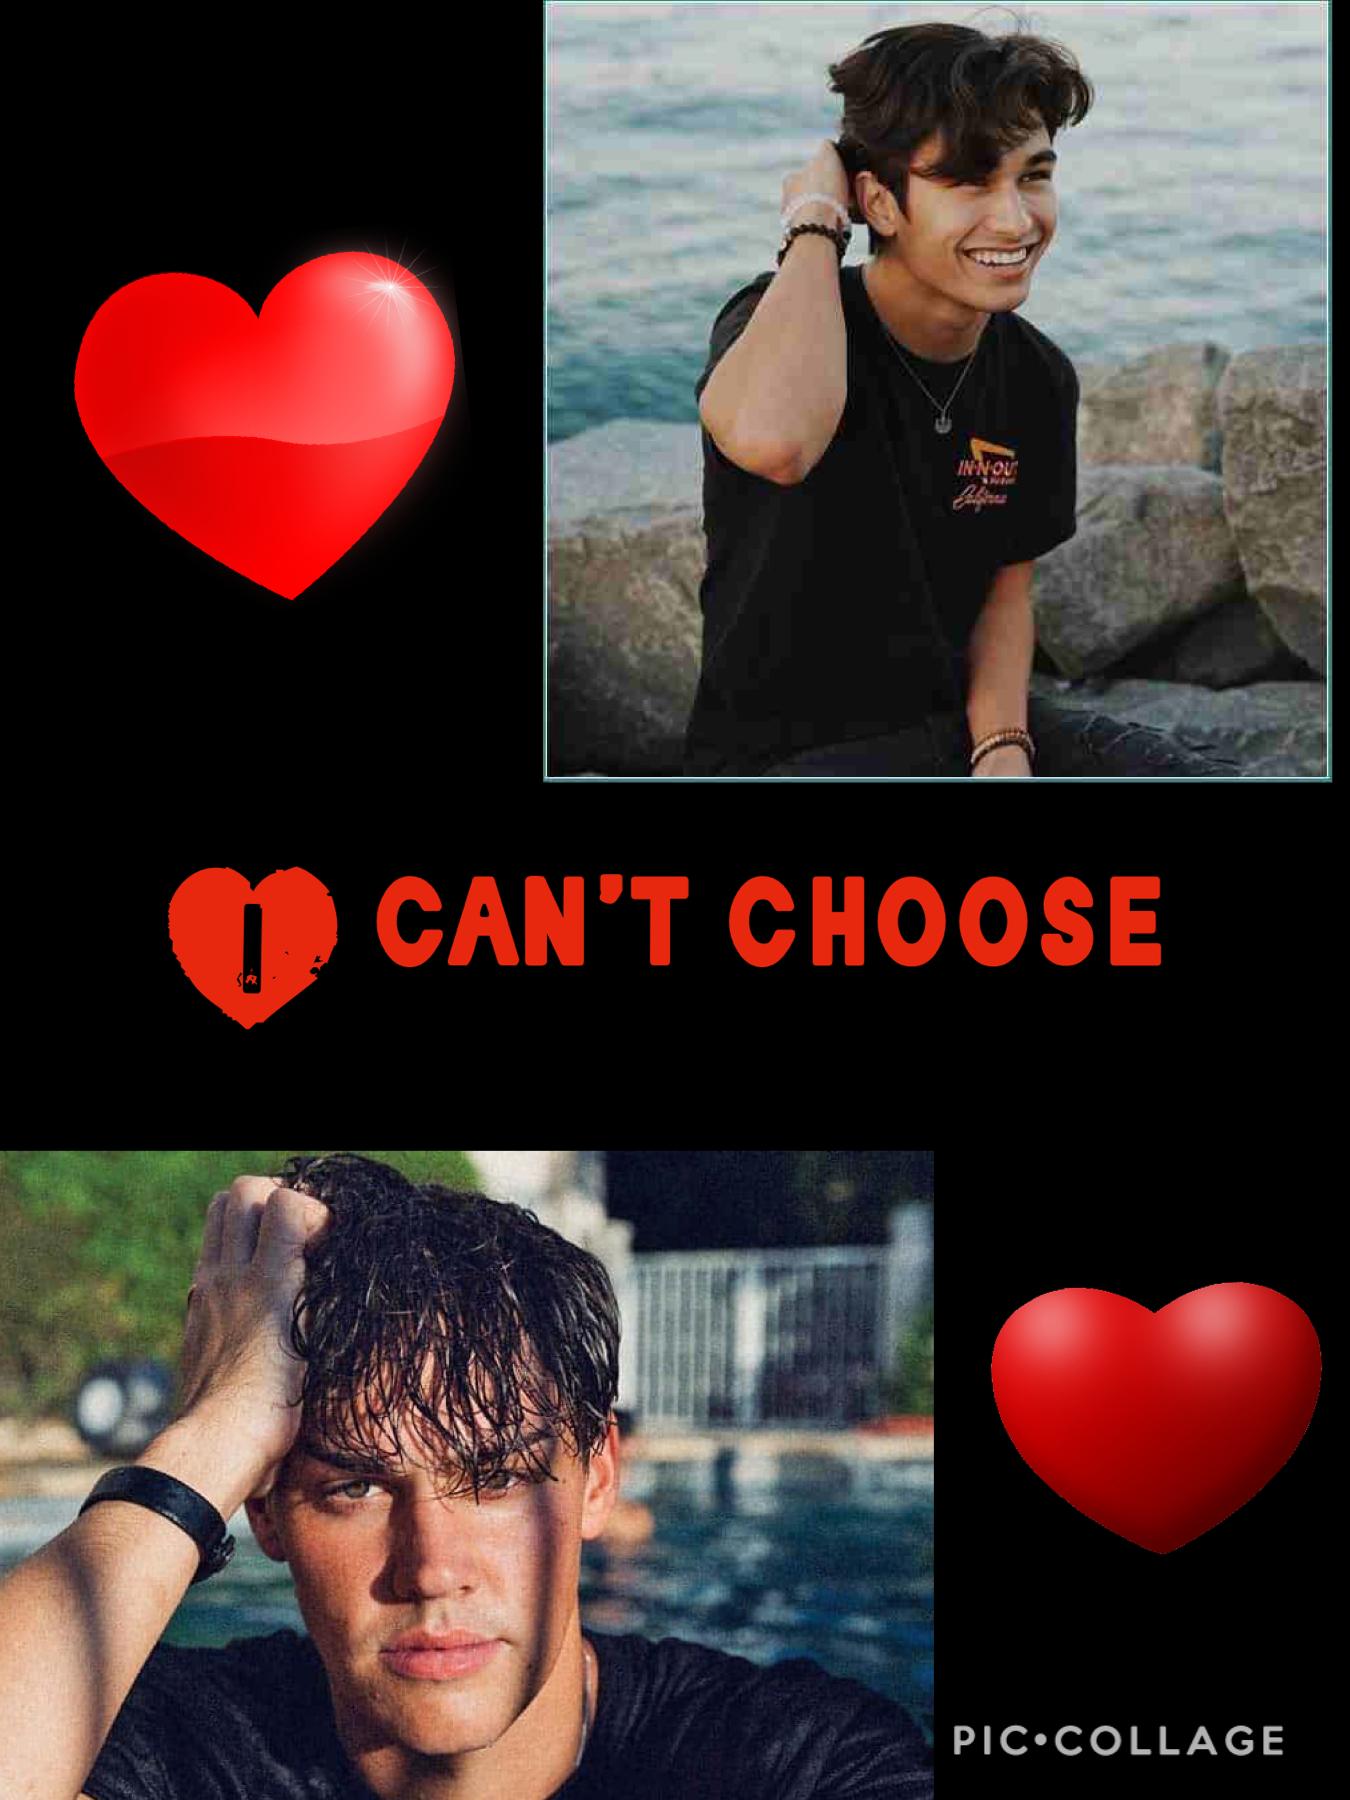 Comment which one you like better
Noah beck 🥵 or Kio Cyrr 🥰